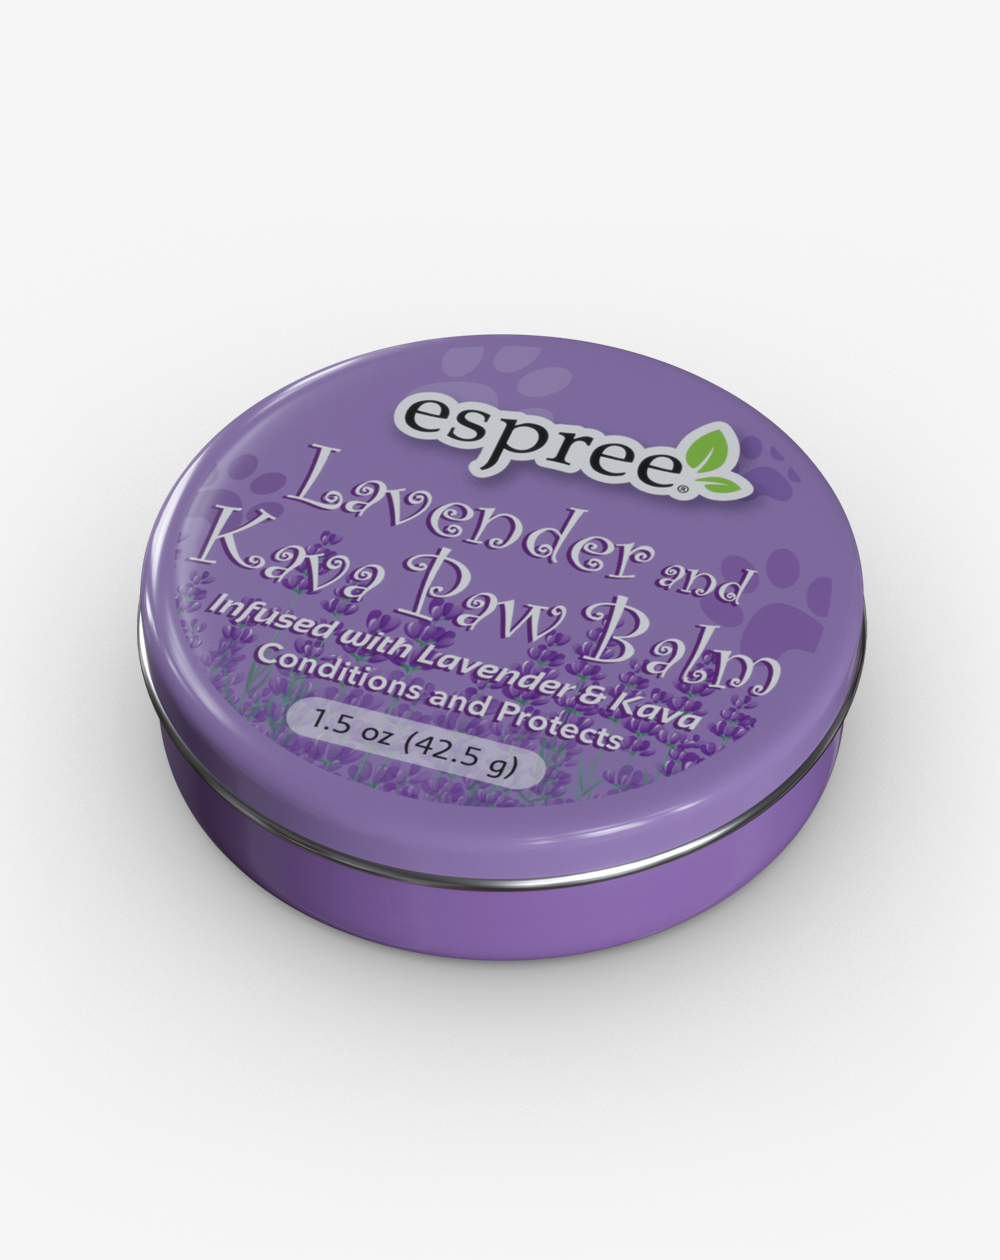 Paw Balm Espree Paw BalmCalm your pets anxiety and stress with Espree Lavender Kava Paw Balm פטשופסל פטשופטבע